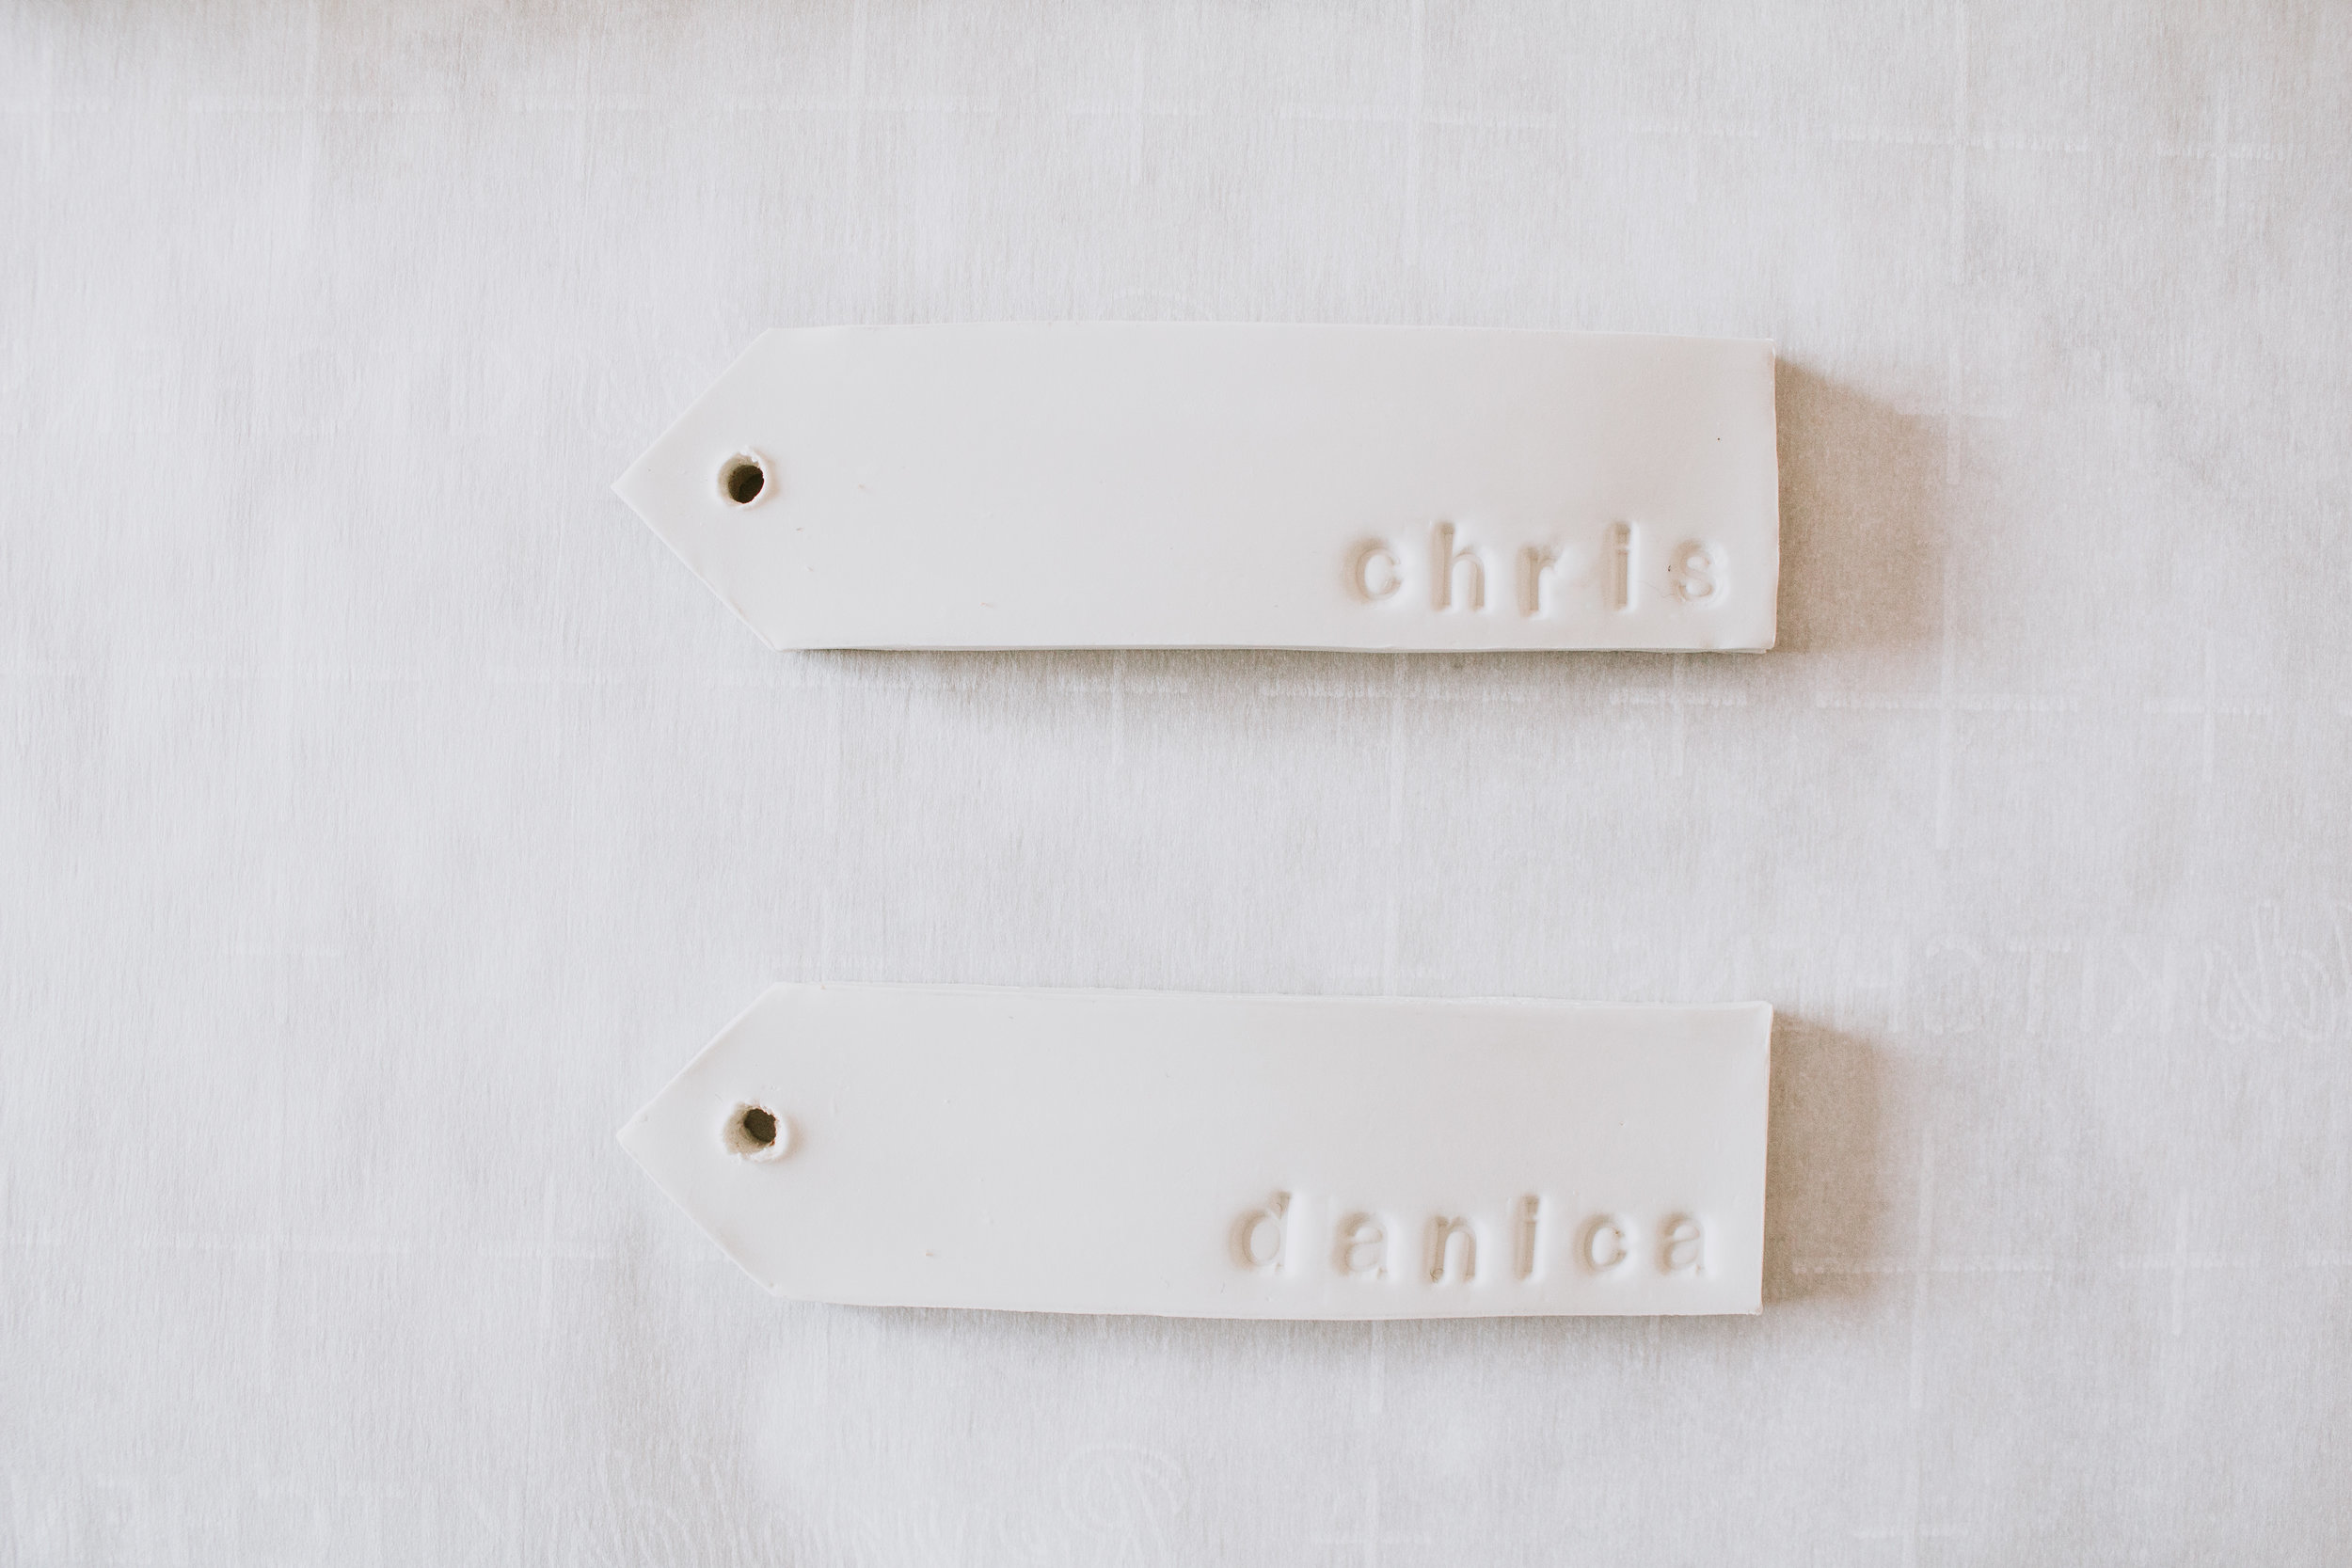 Creative gift wrapping with clay name tags. DIY personalized clay gift tags by Refined Design - clay name tags you can make from home! Perfect craft project and gift idea for weddings, Christmas, holidays, and birthdays. Custom clay Christmas orname…